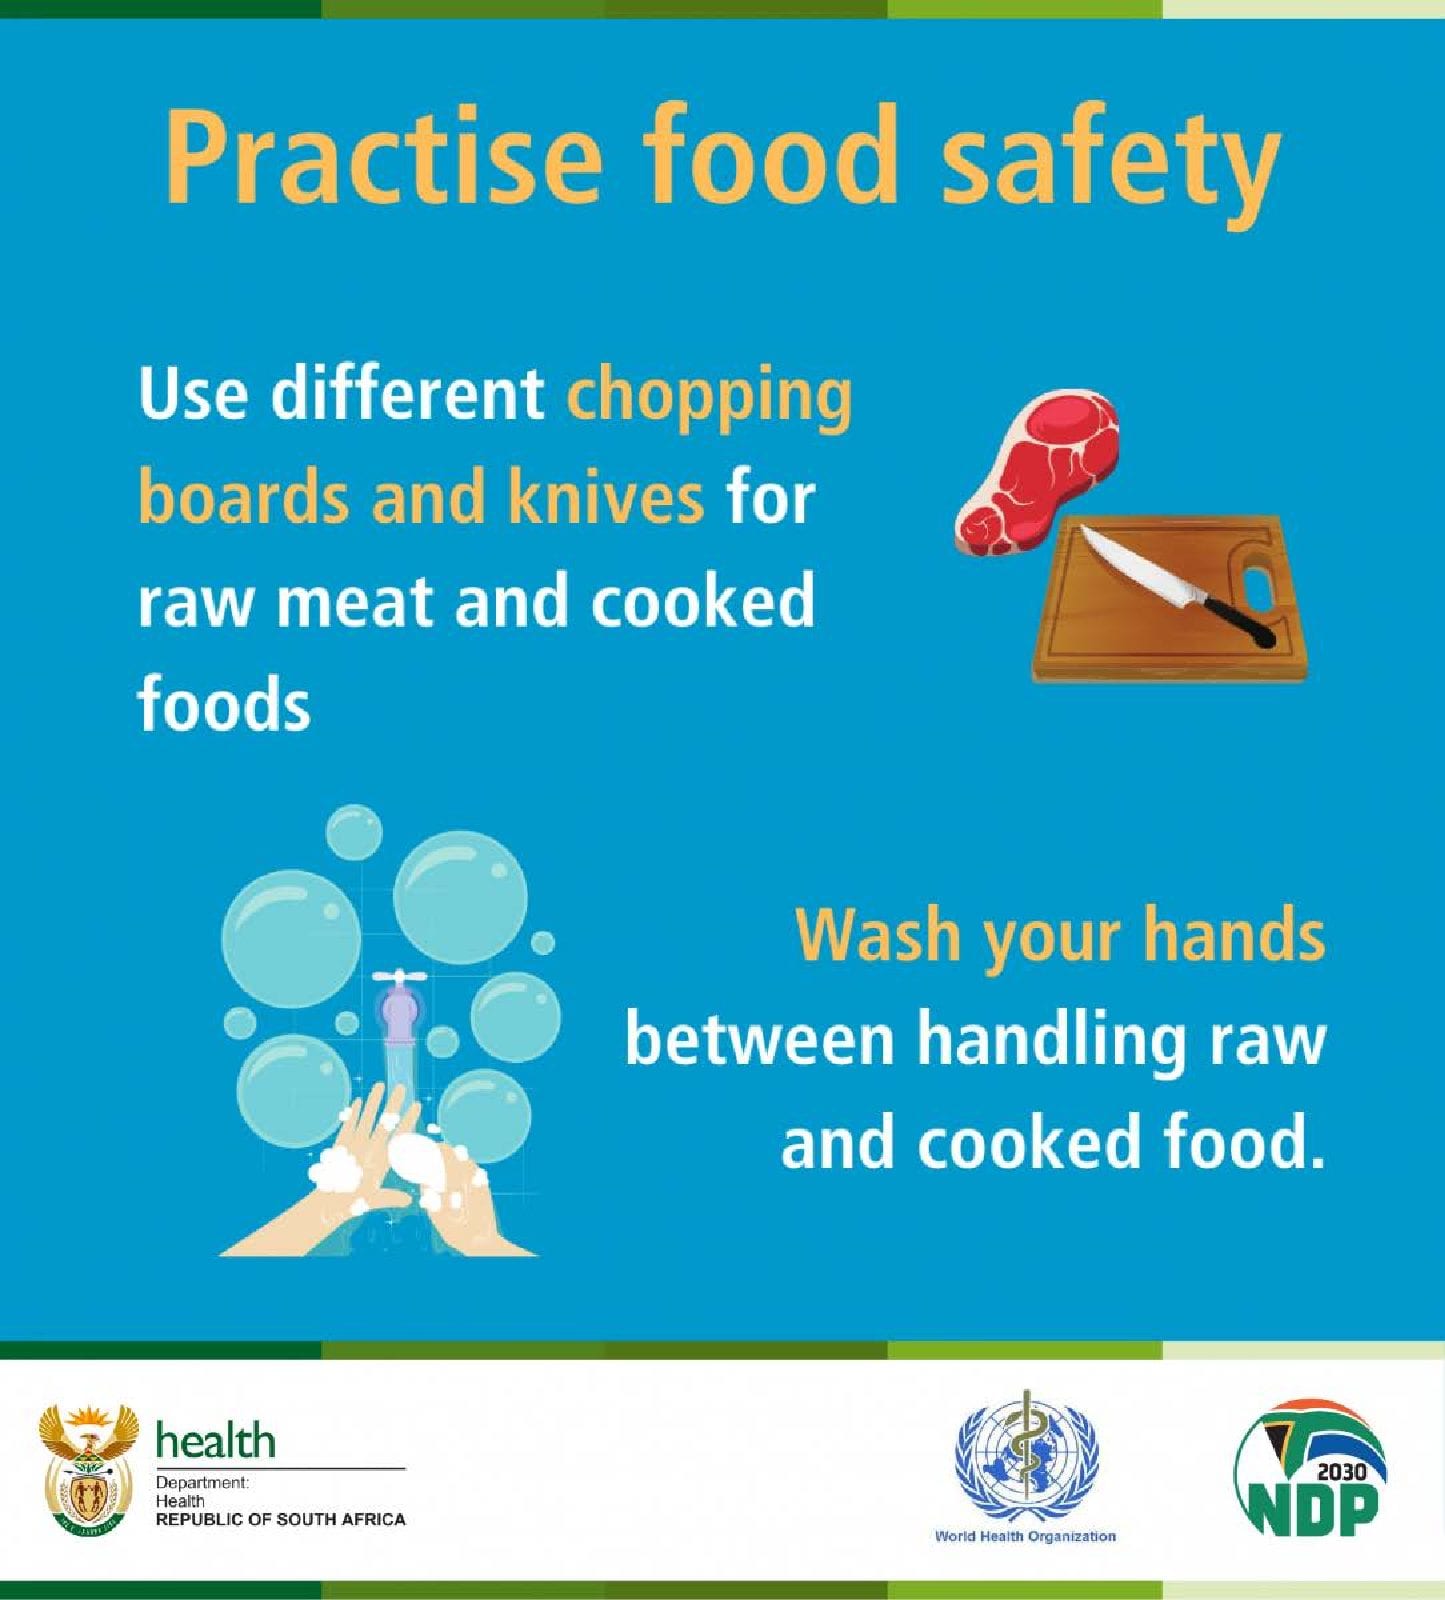 Food safety during outbreak